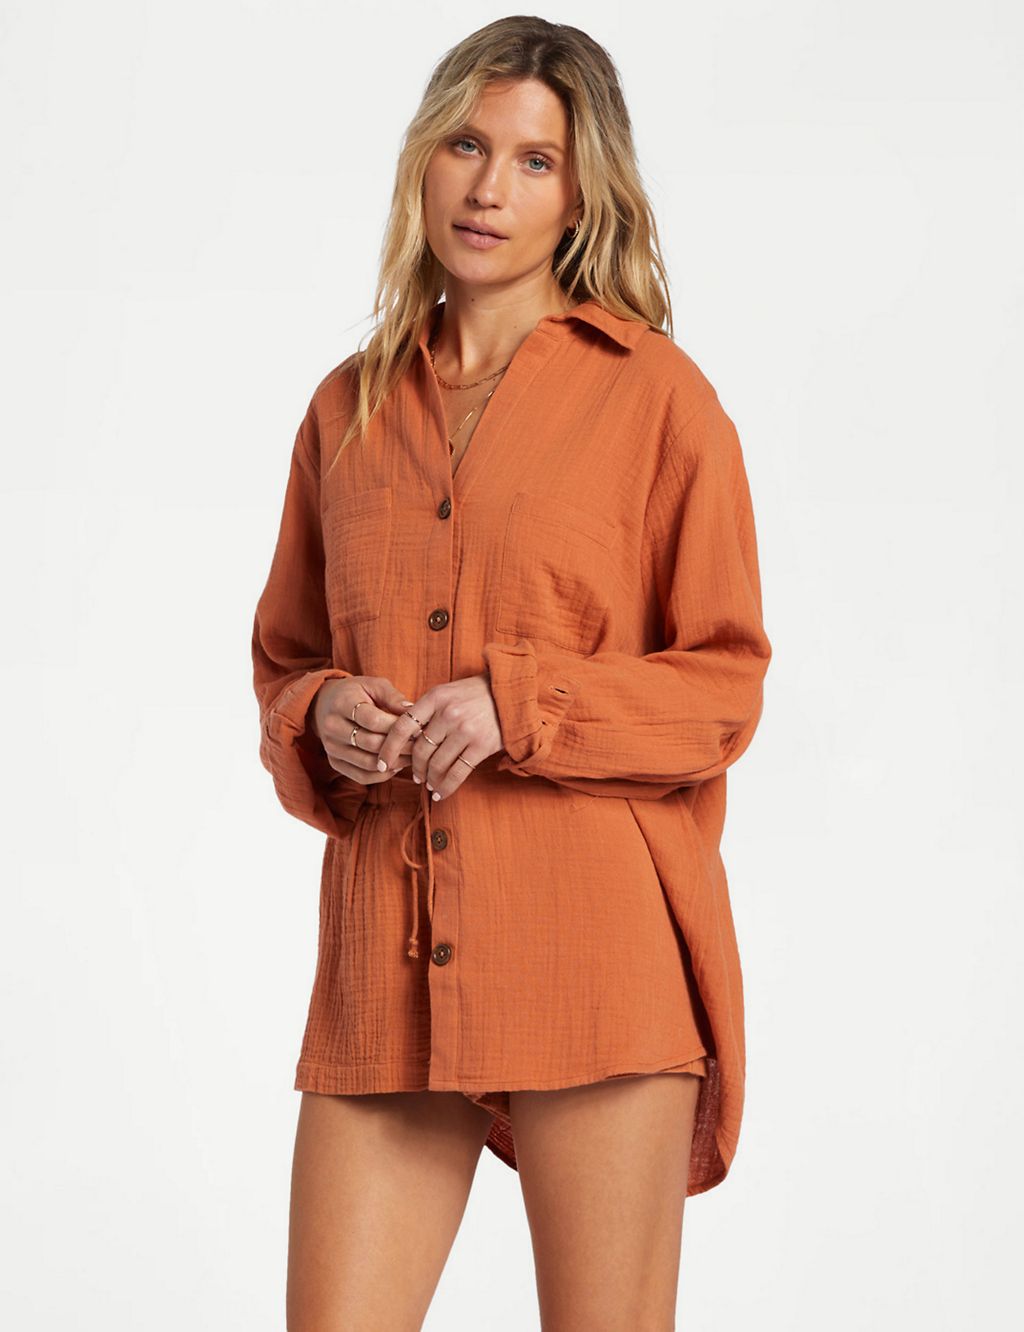 Swell Pure Cotton Beach Cover Up Shirt 2 of 7